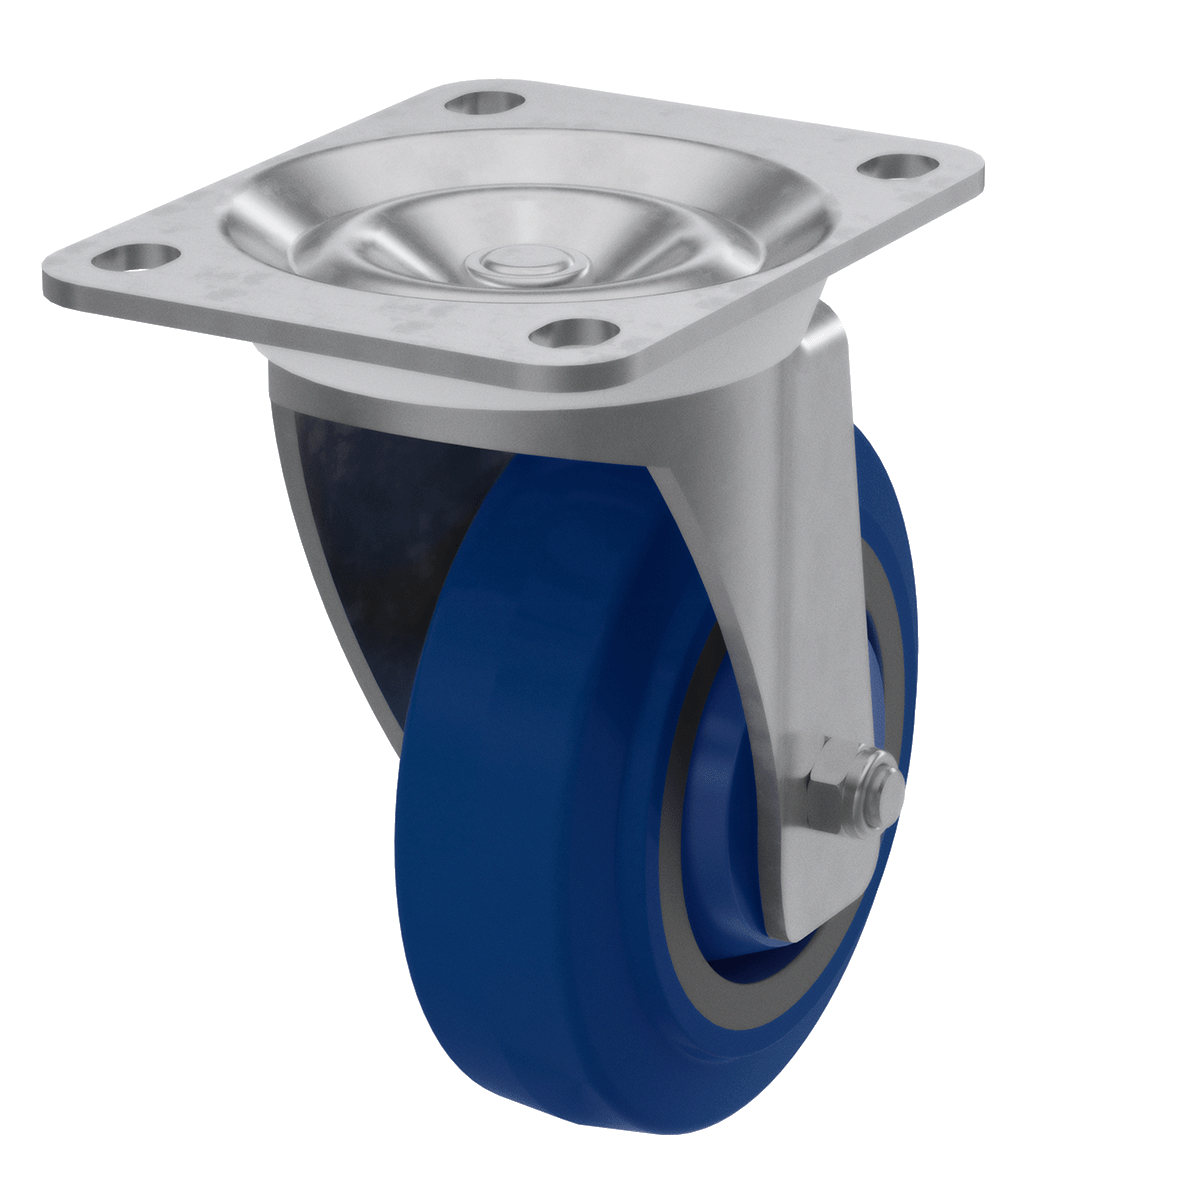 4" blue wheel swivel caster, perspective view